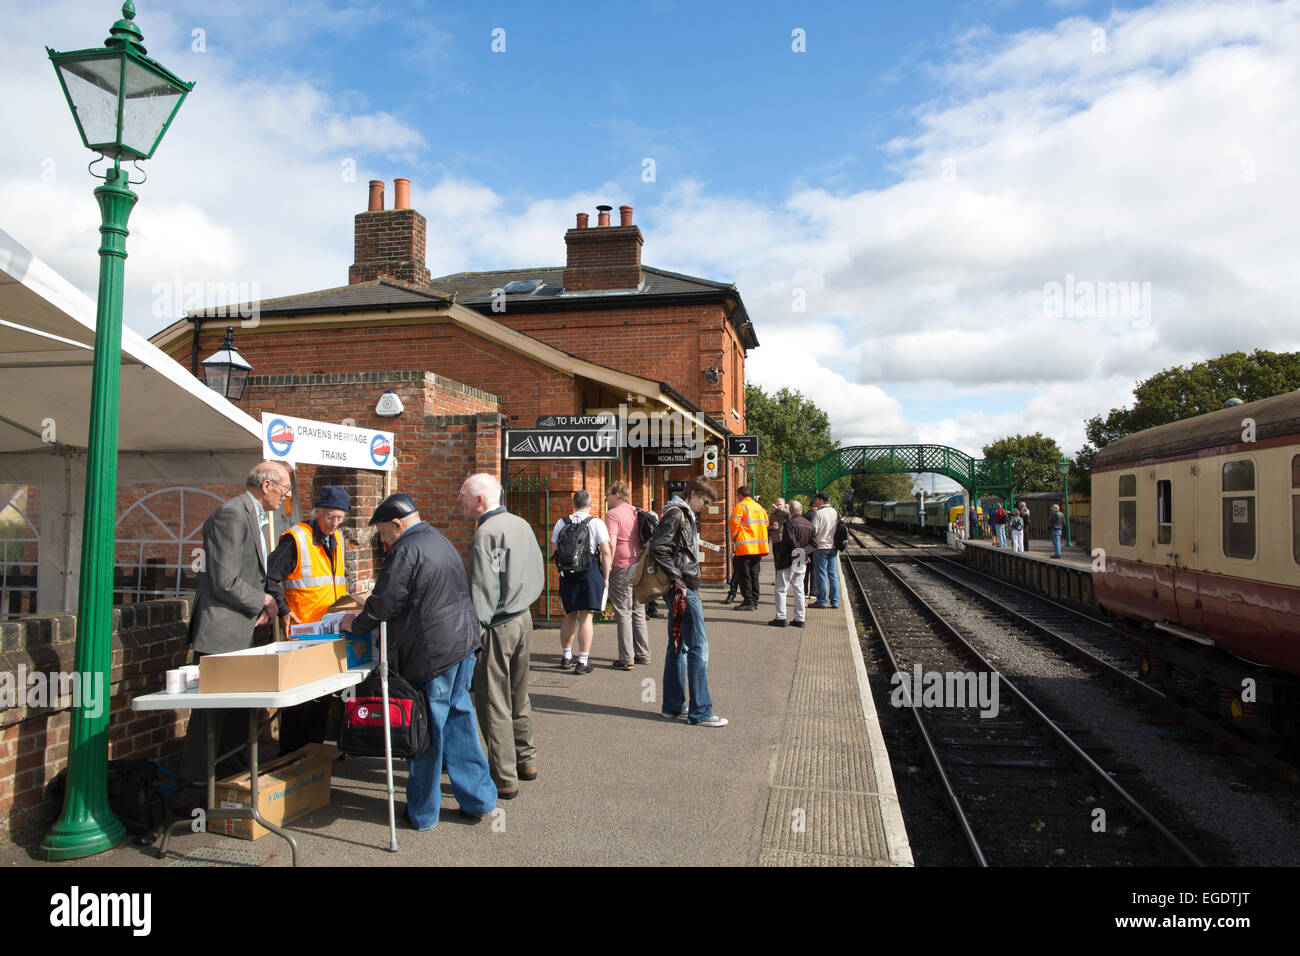 Cravens Heritage Tube train enthusiasts on the platform at North Weald Station, Epping Ongar Railway, Essex, England, UK Stock Photo